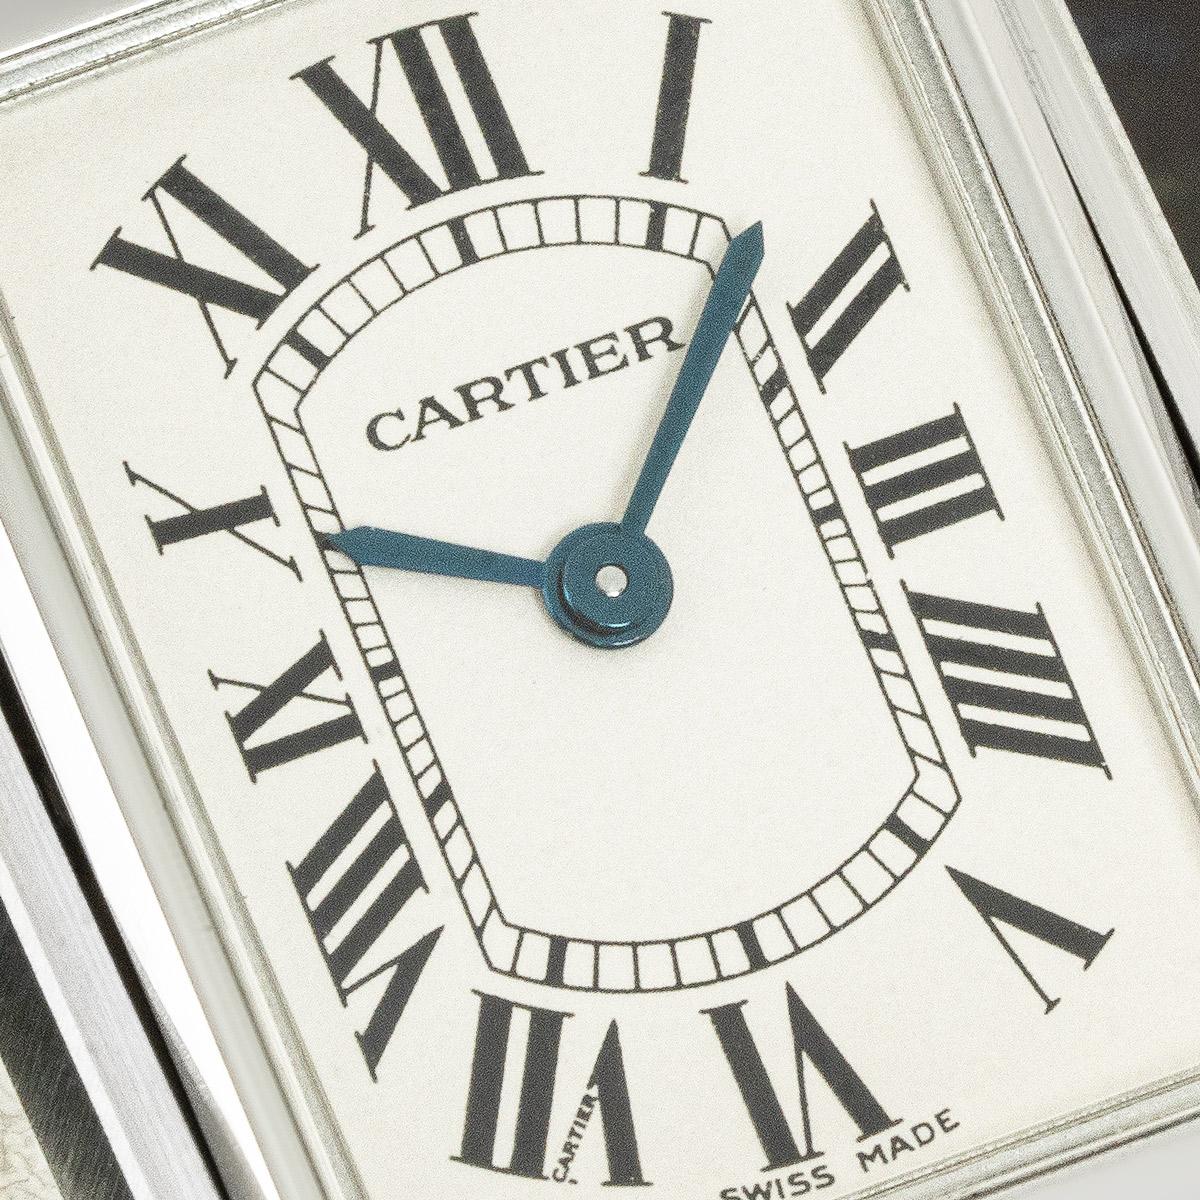 A 24mm stainless steel Tank Basculante by Cartier. Featuring a silver dial with roman numerals, blued steeled sword-shaped hands, a secret Cartier signature at VII and a stainless steel bezel. The watch also includes an engraving on the reversible